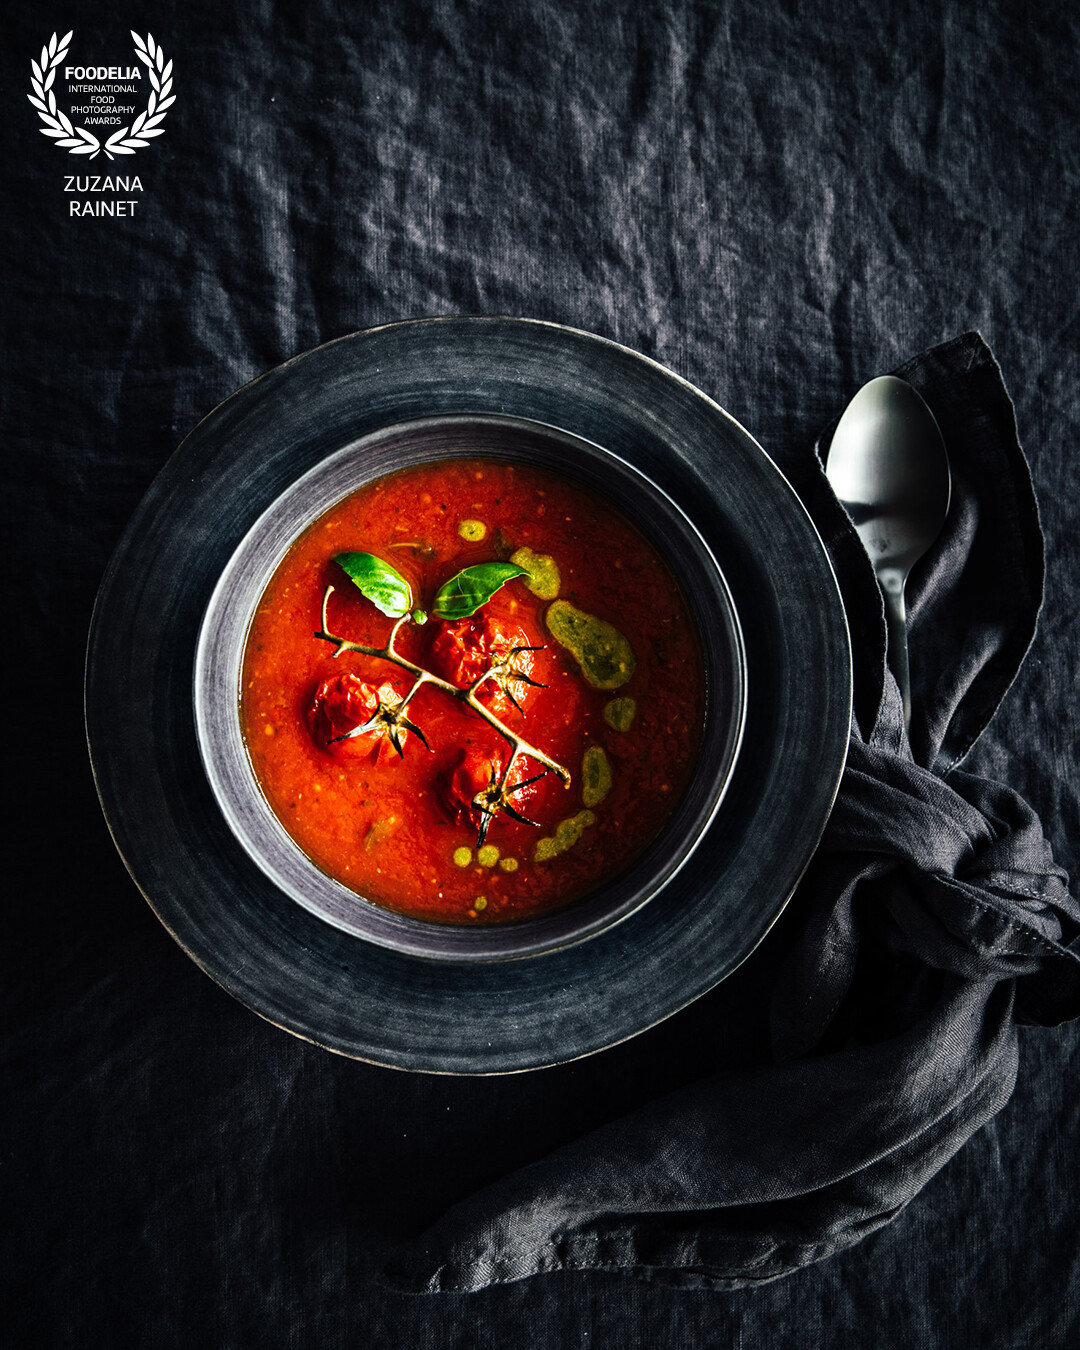 Homemake roasted tomato soup with fresh basil pesto and roasted tomatoes. Shot with Canon EOS R6 and natural light in my home studio.